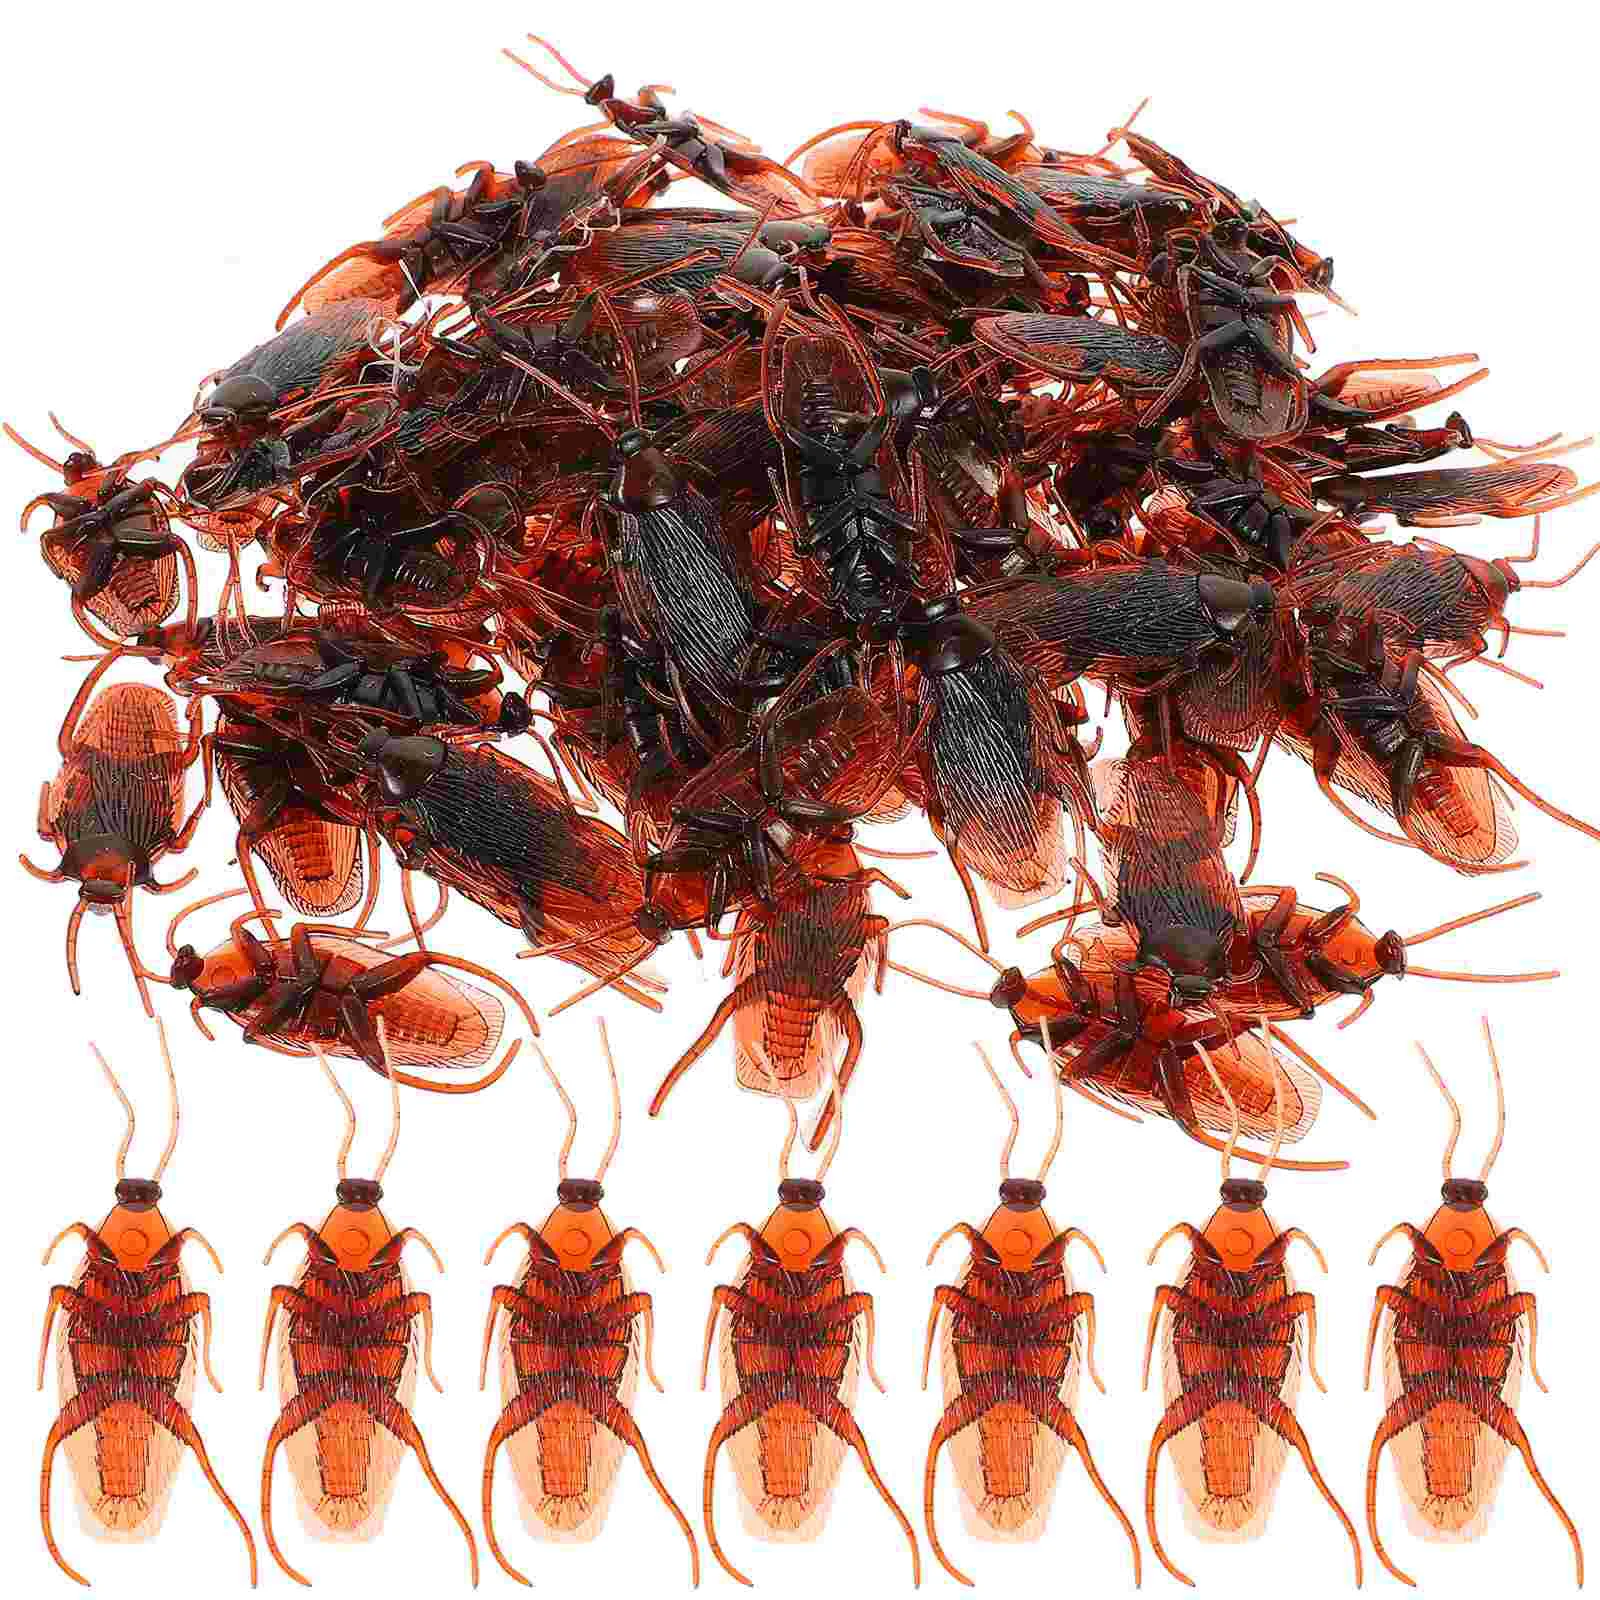 

TINKSKY 100pcs Fake Roach Prank Novelty Plastic Cockroach Bugs Look Real for Halloween